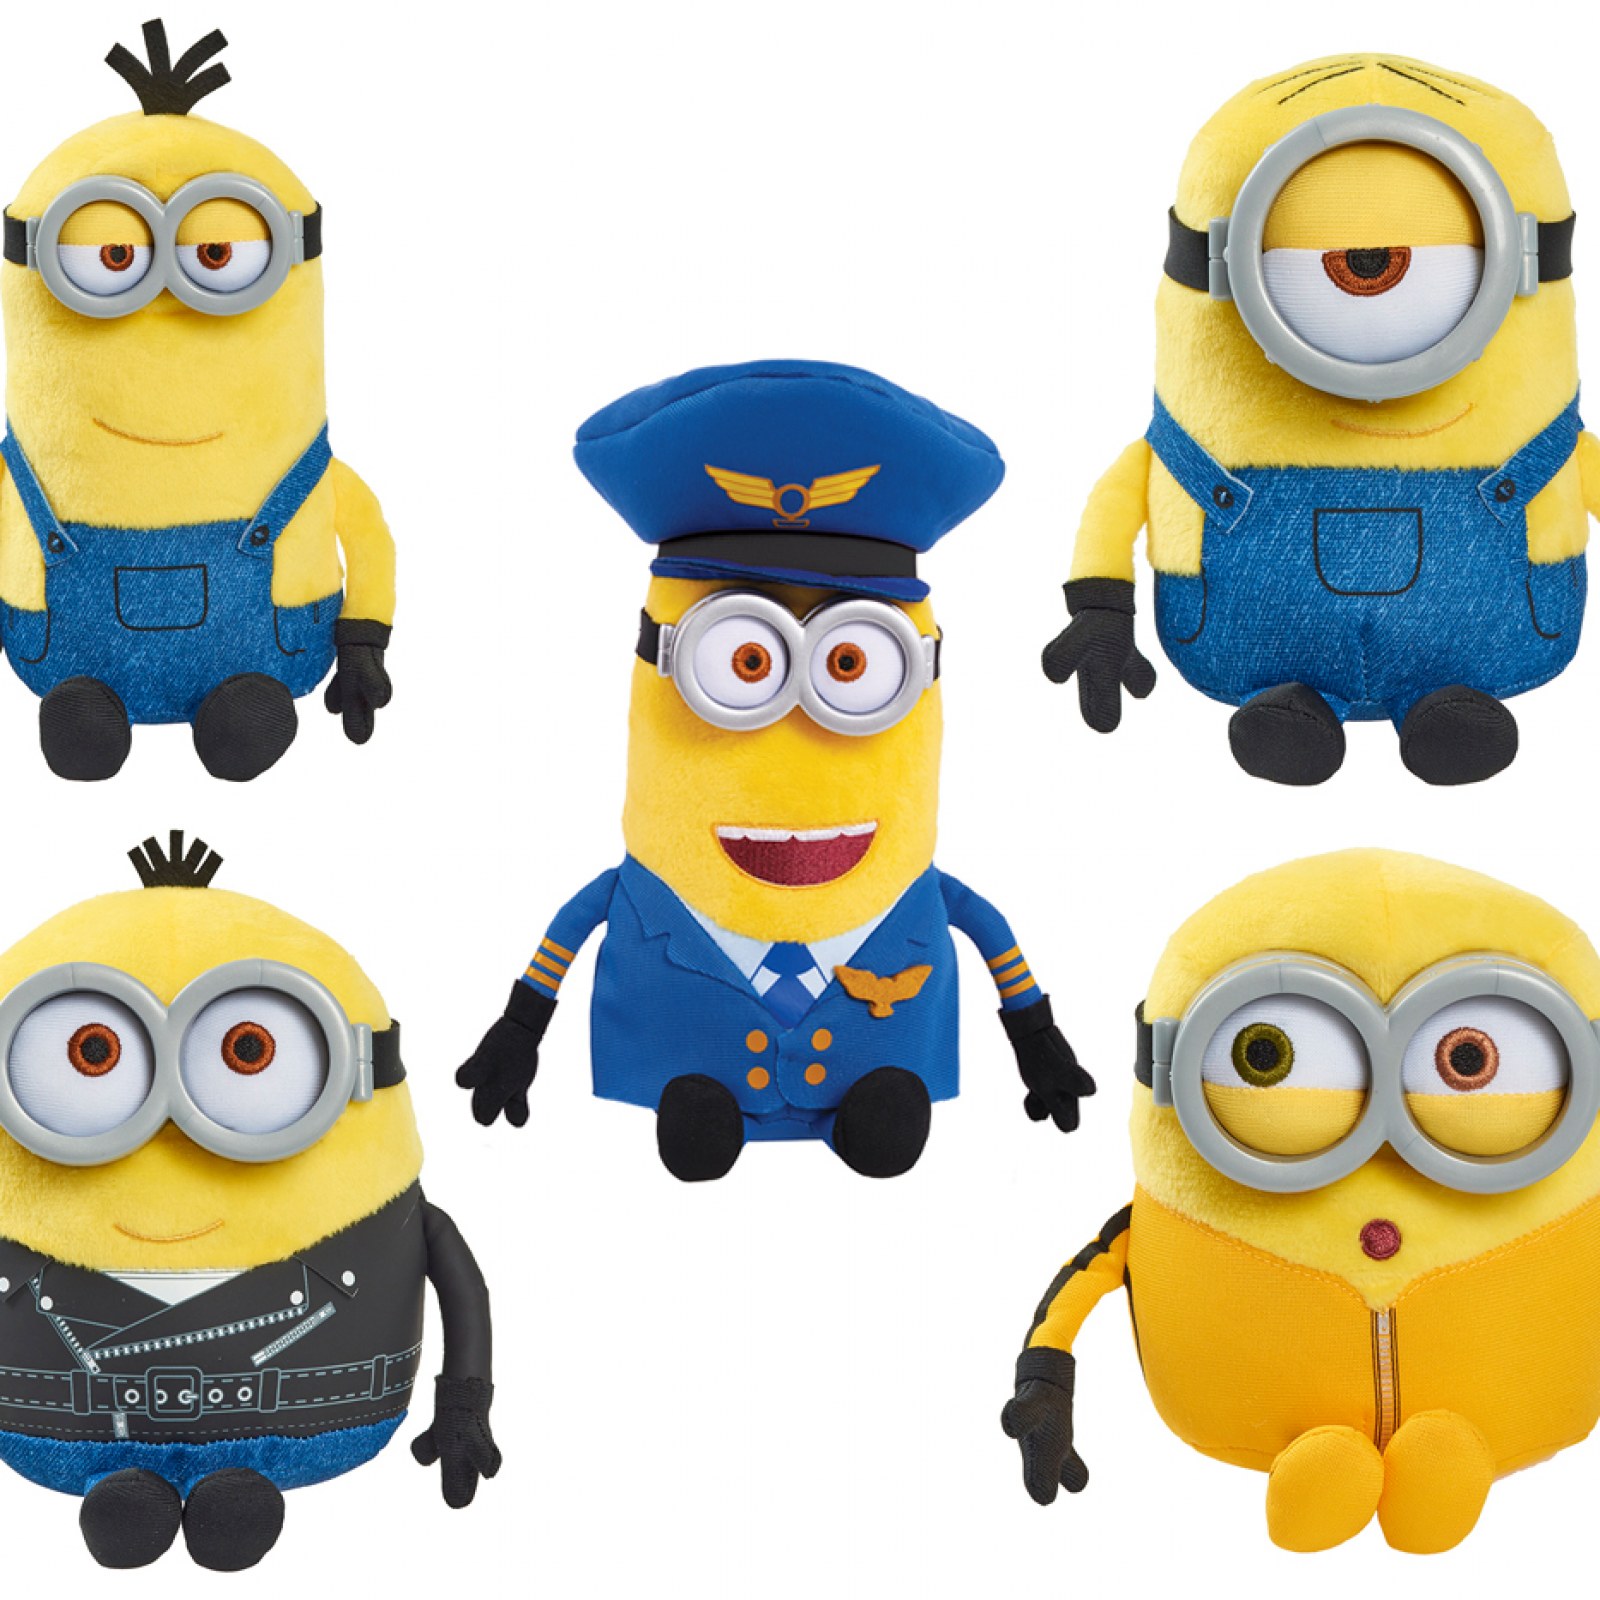 Minions The Rise Of Gru Plush Releasing From Just Play In May